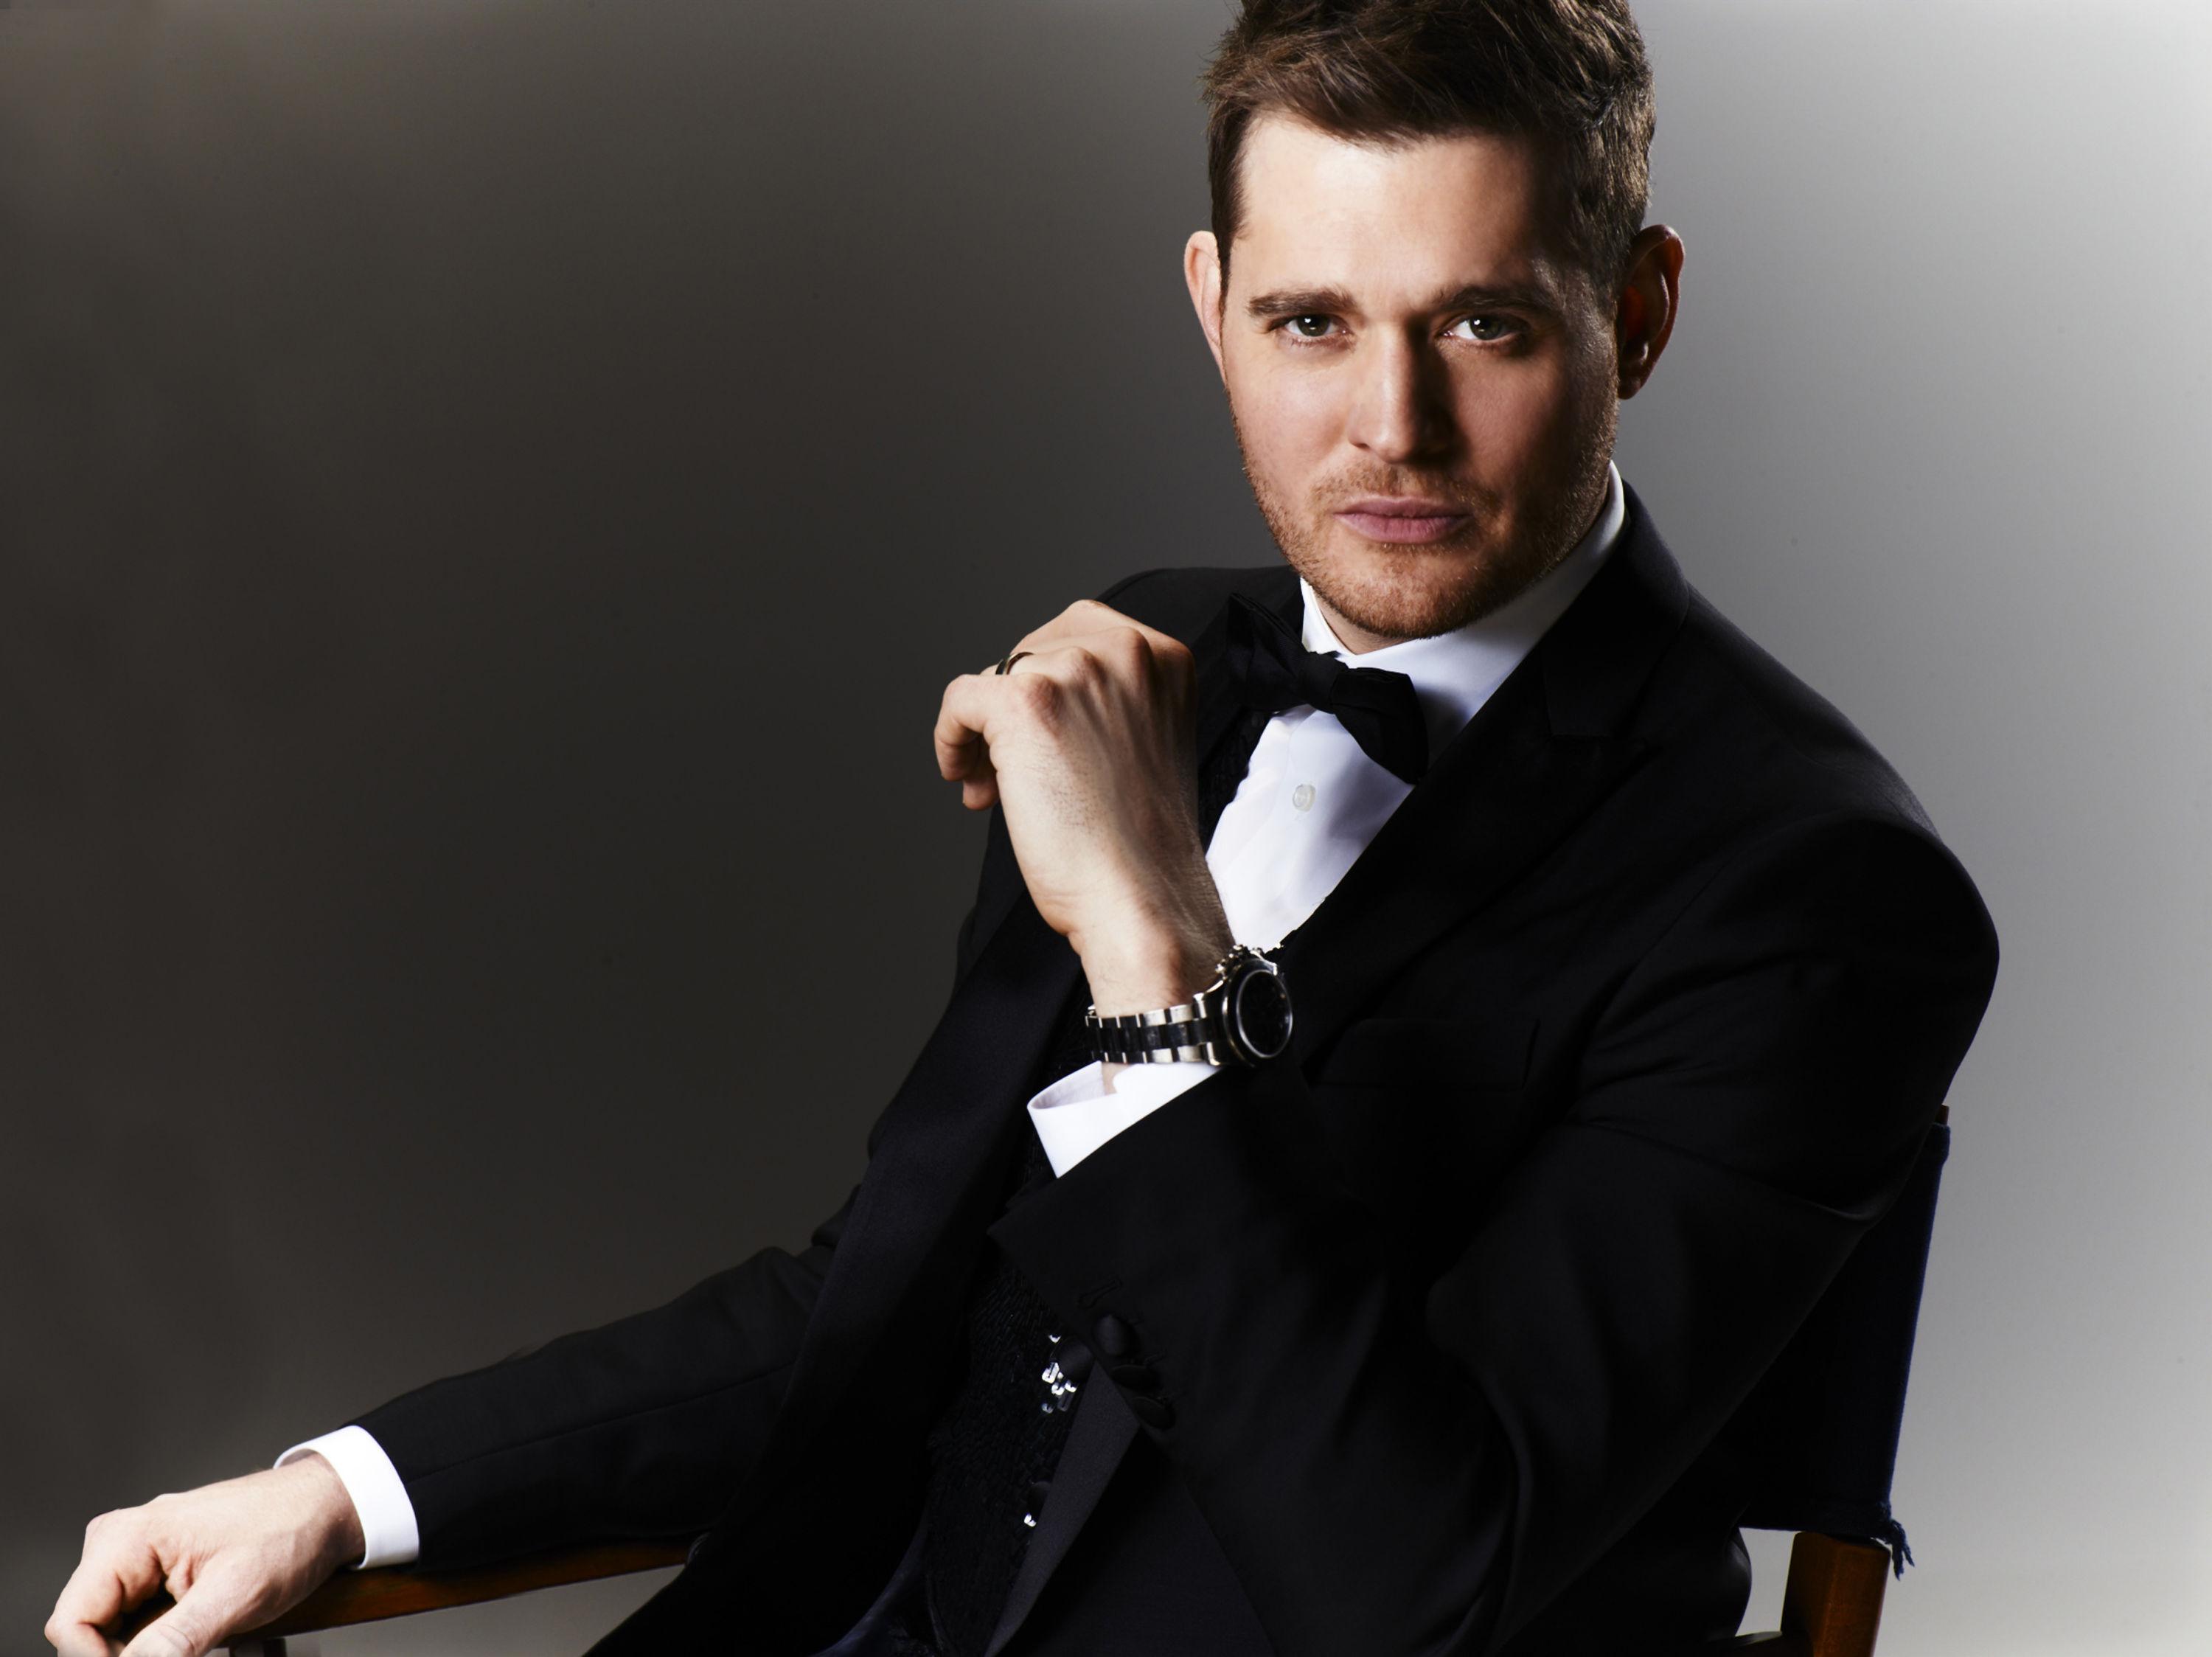 More tickets for Buble's show Melville Times